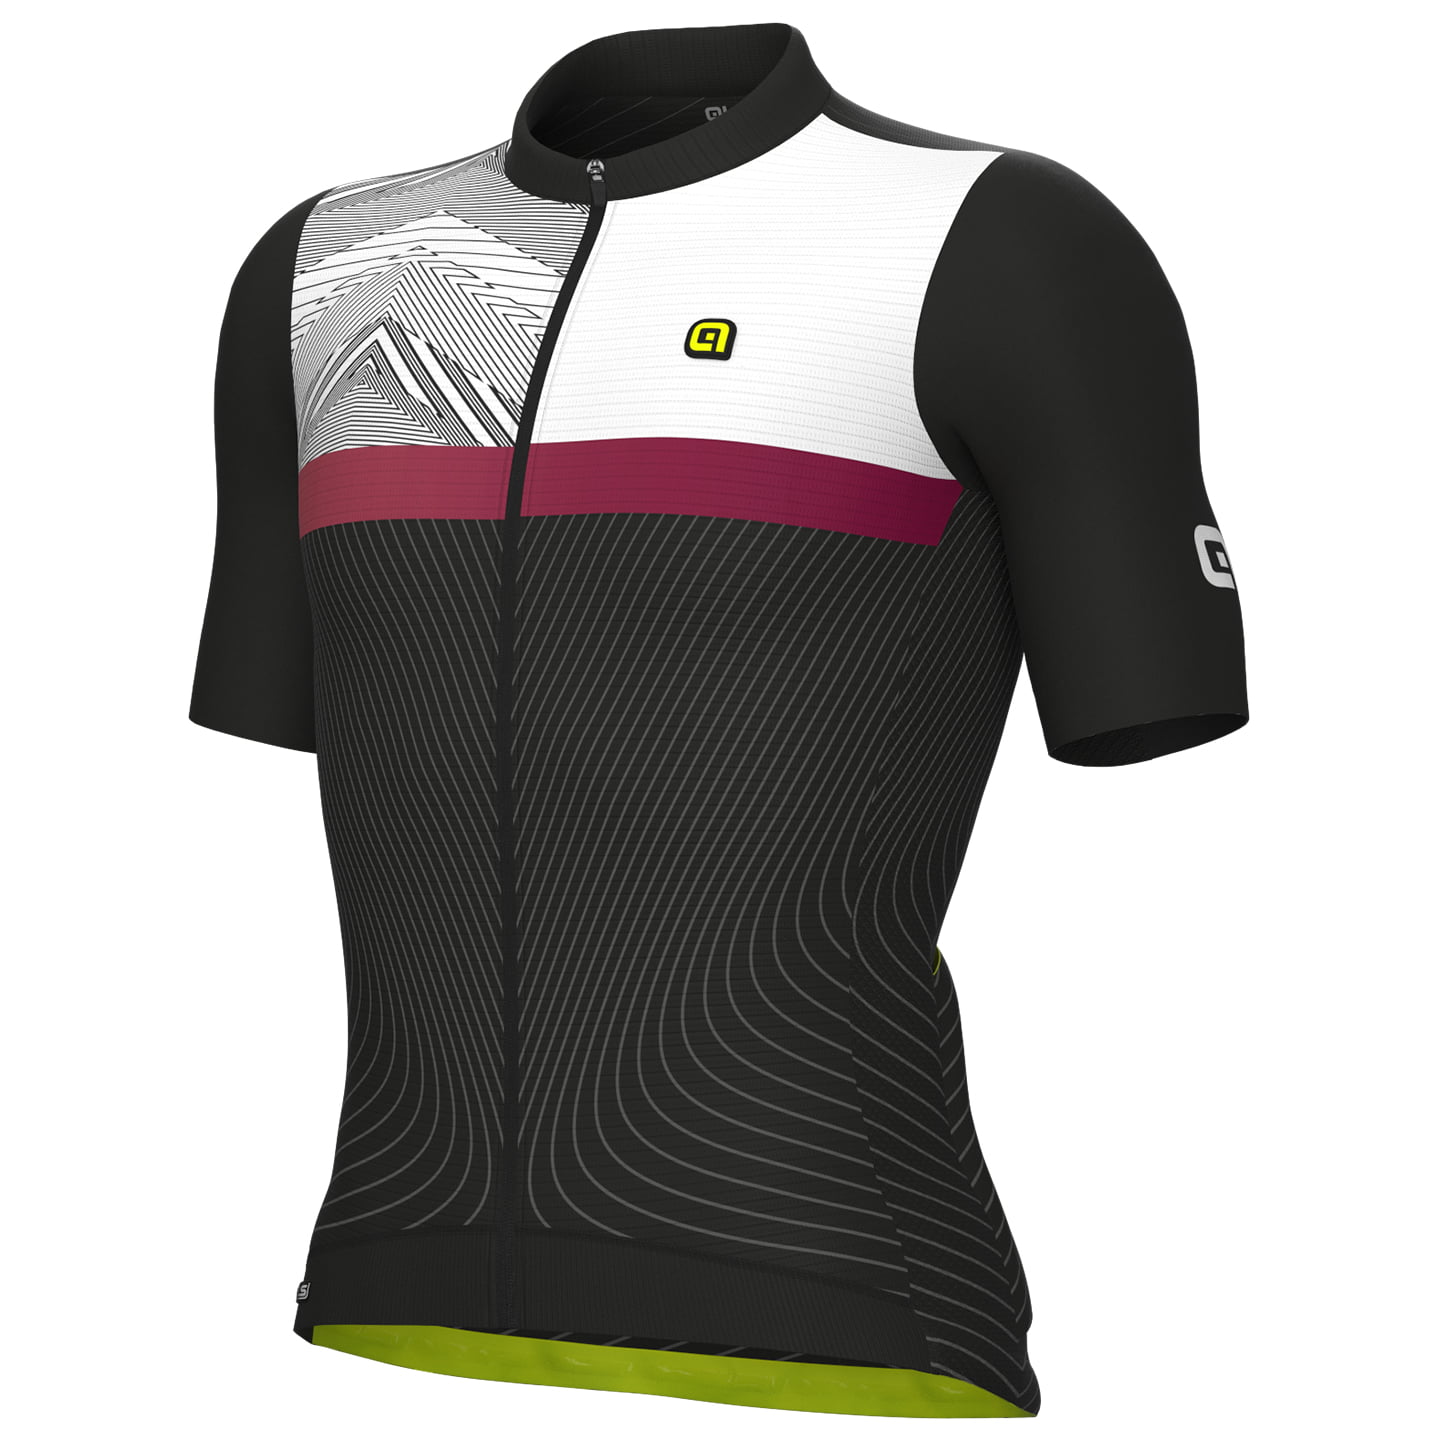 ALE Zig Zag Short Sleeve Jersey, for men, size 2XL, Cycling jersey, Cycle clothing